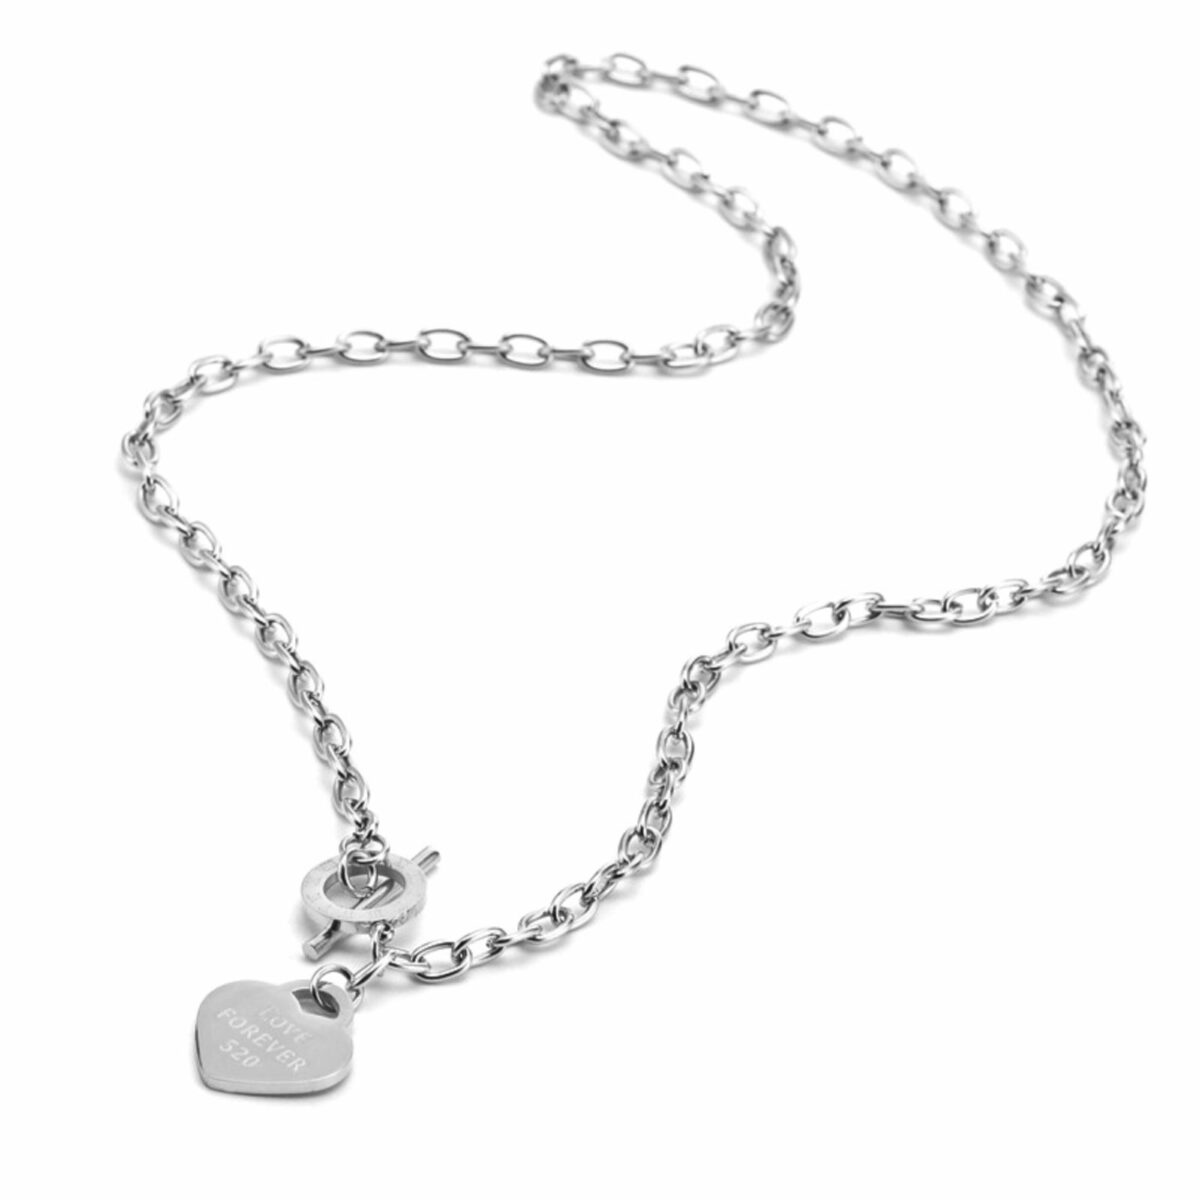 https://m.clubbella.co/product/silver-forever-heart-pendant-necklace/ 1674978445226-01